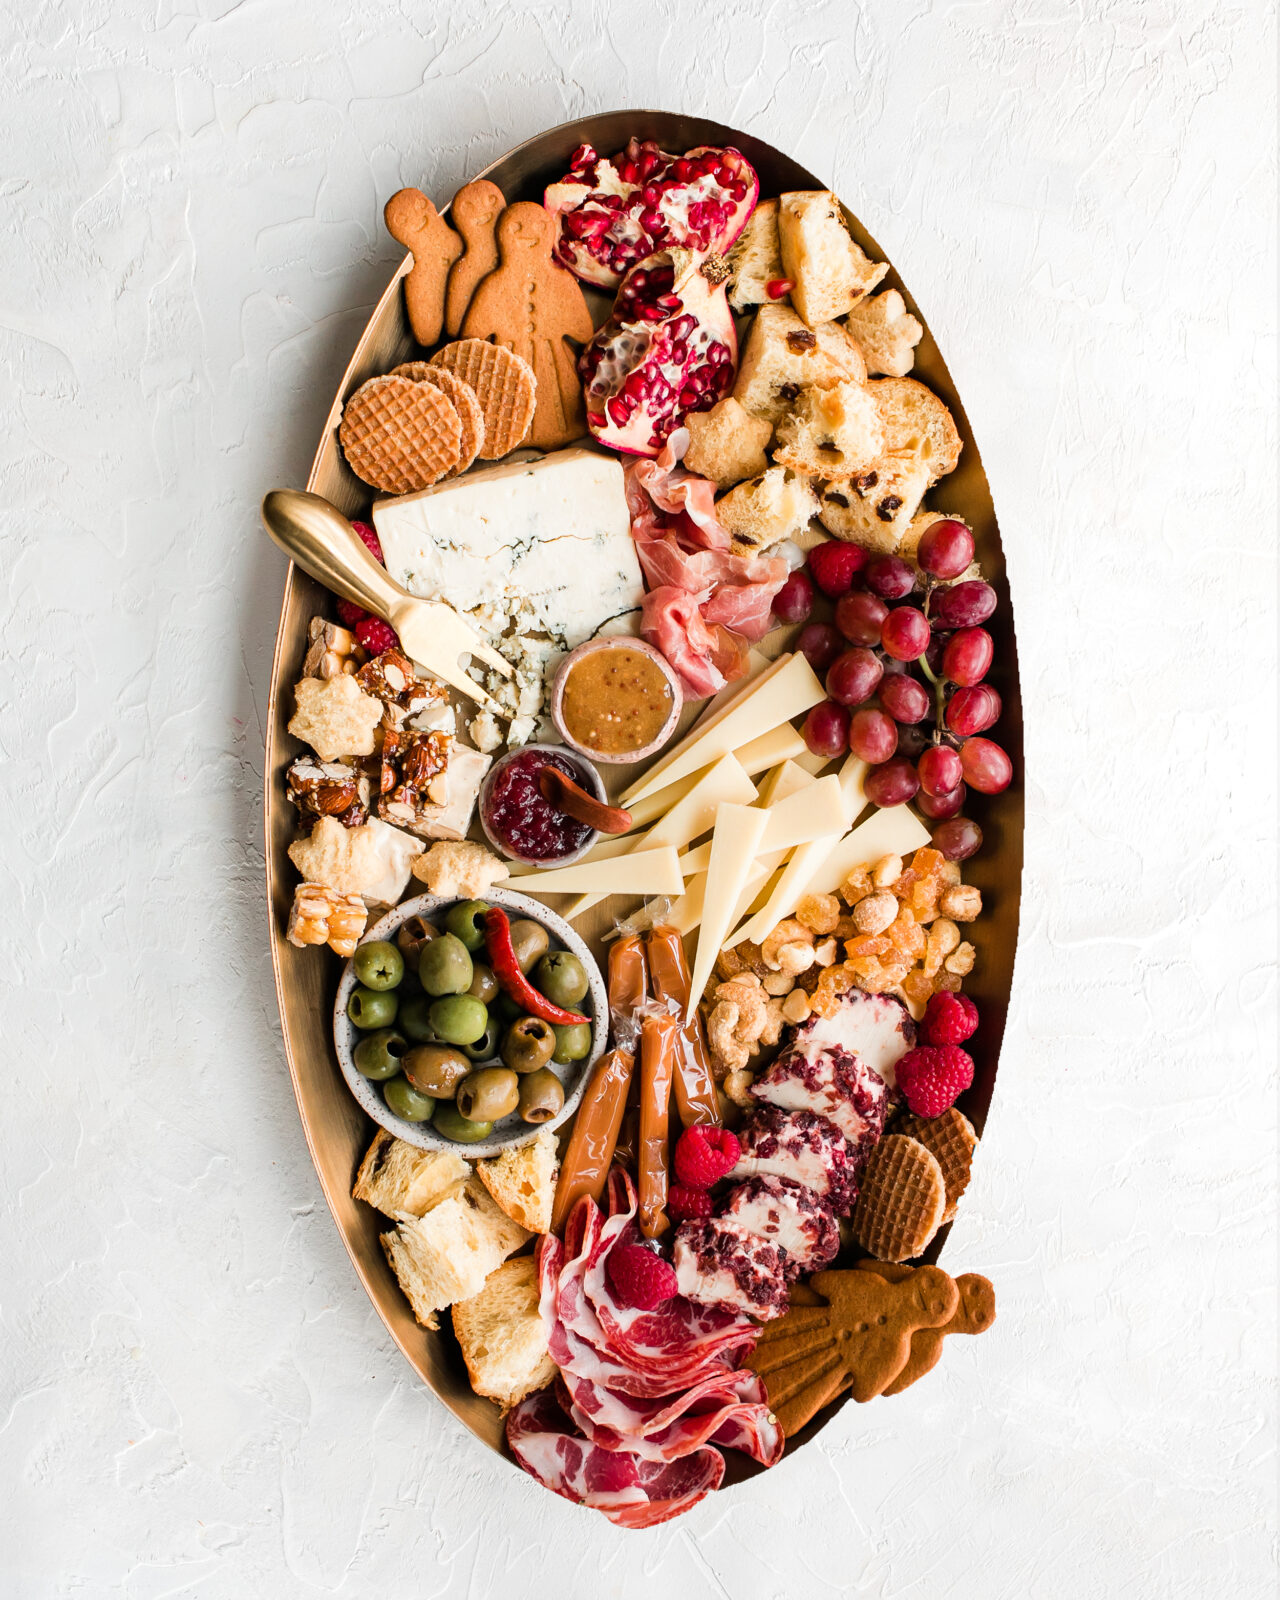 https://www.rothcheese.com/wp-content/uploads/2021/11/Roth_Beauty_Cheeseboard_HowToBuildAHolidayCheeseboard_07-1280x1600.jpg